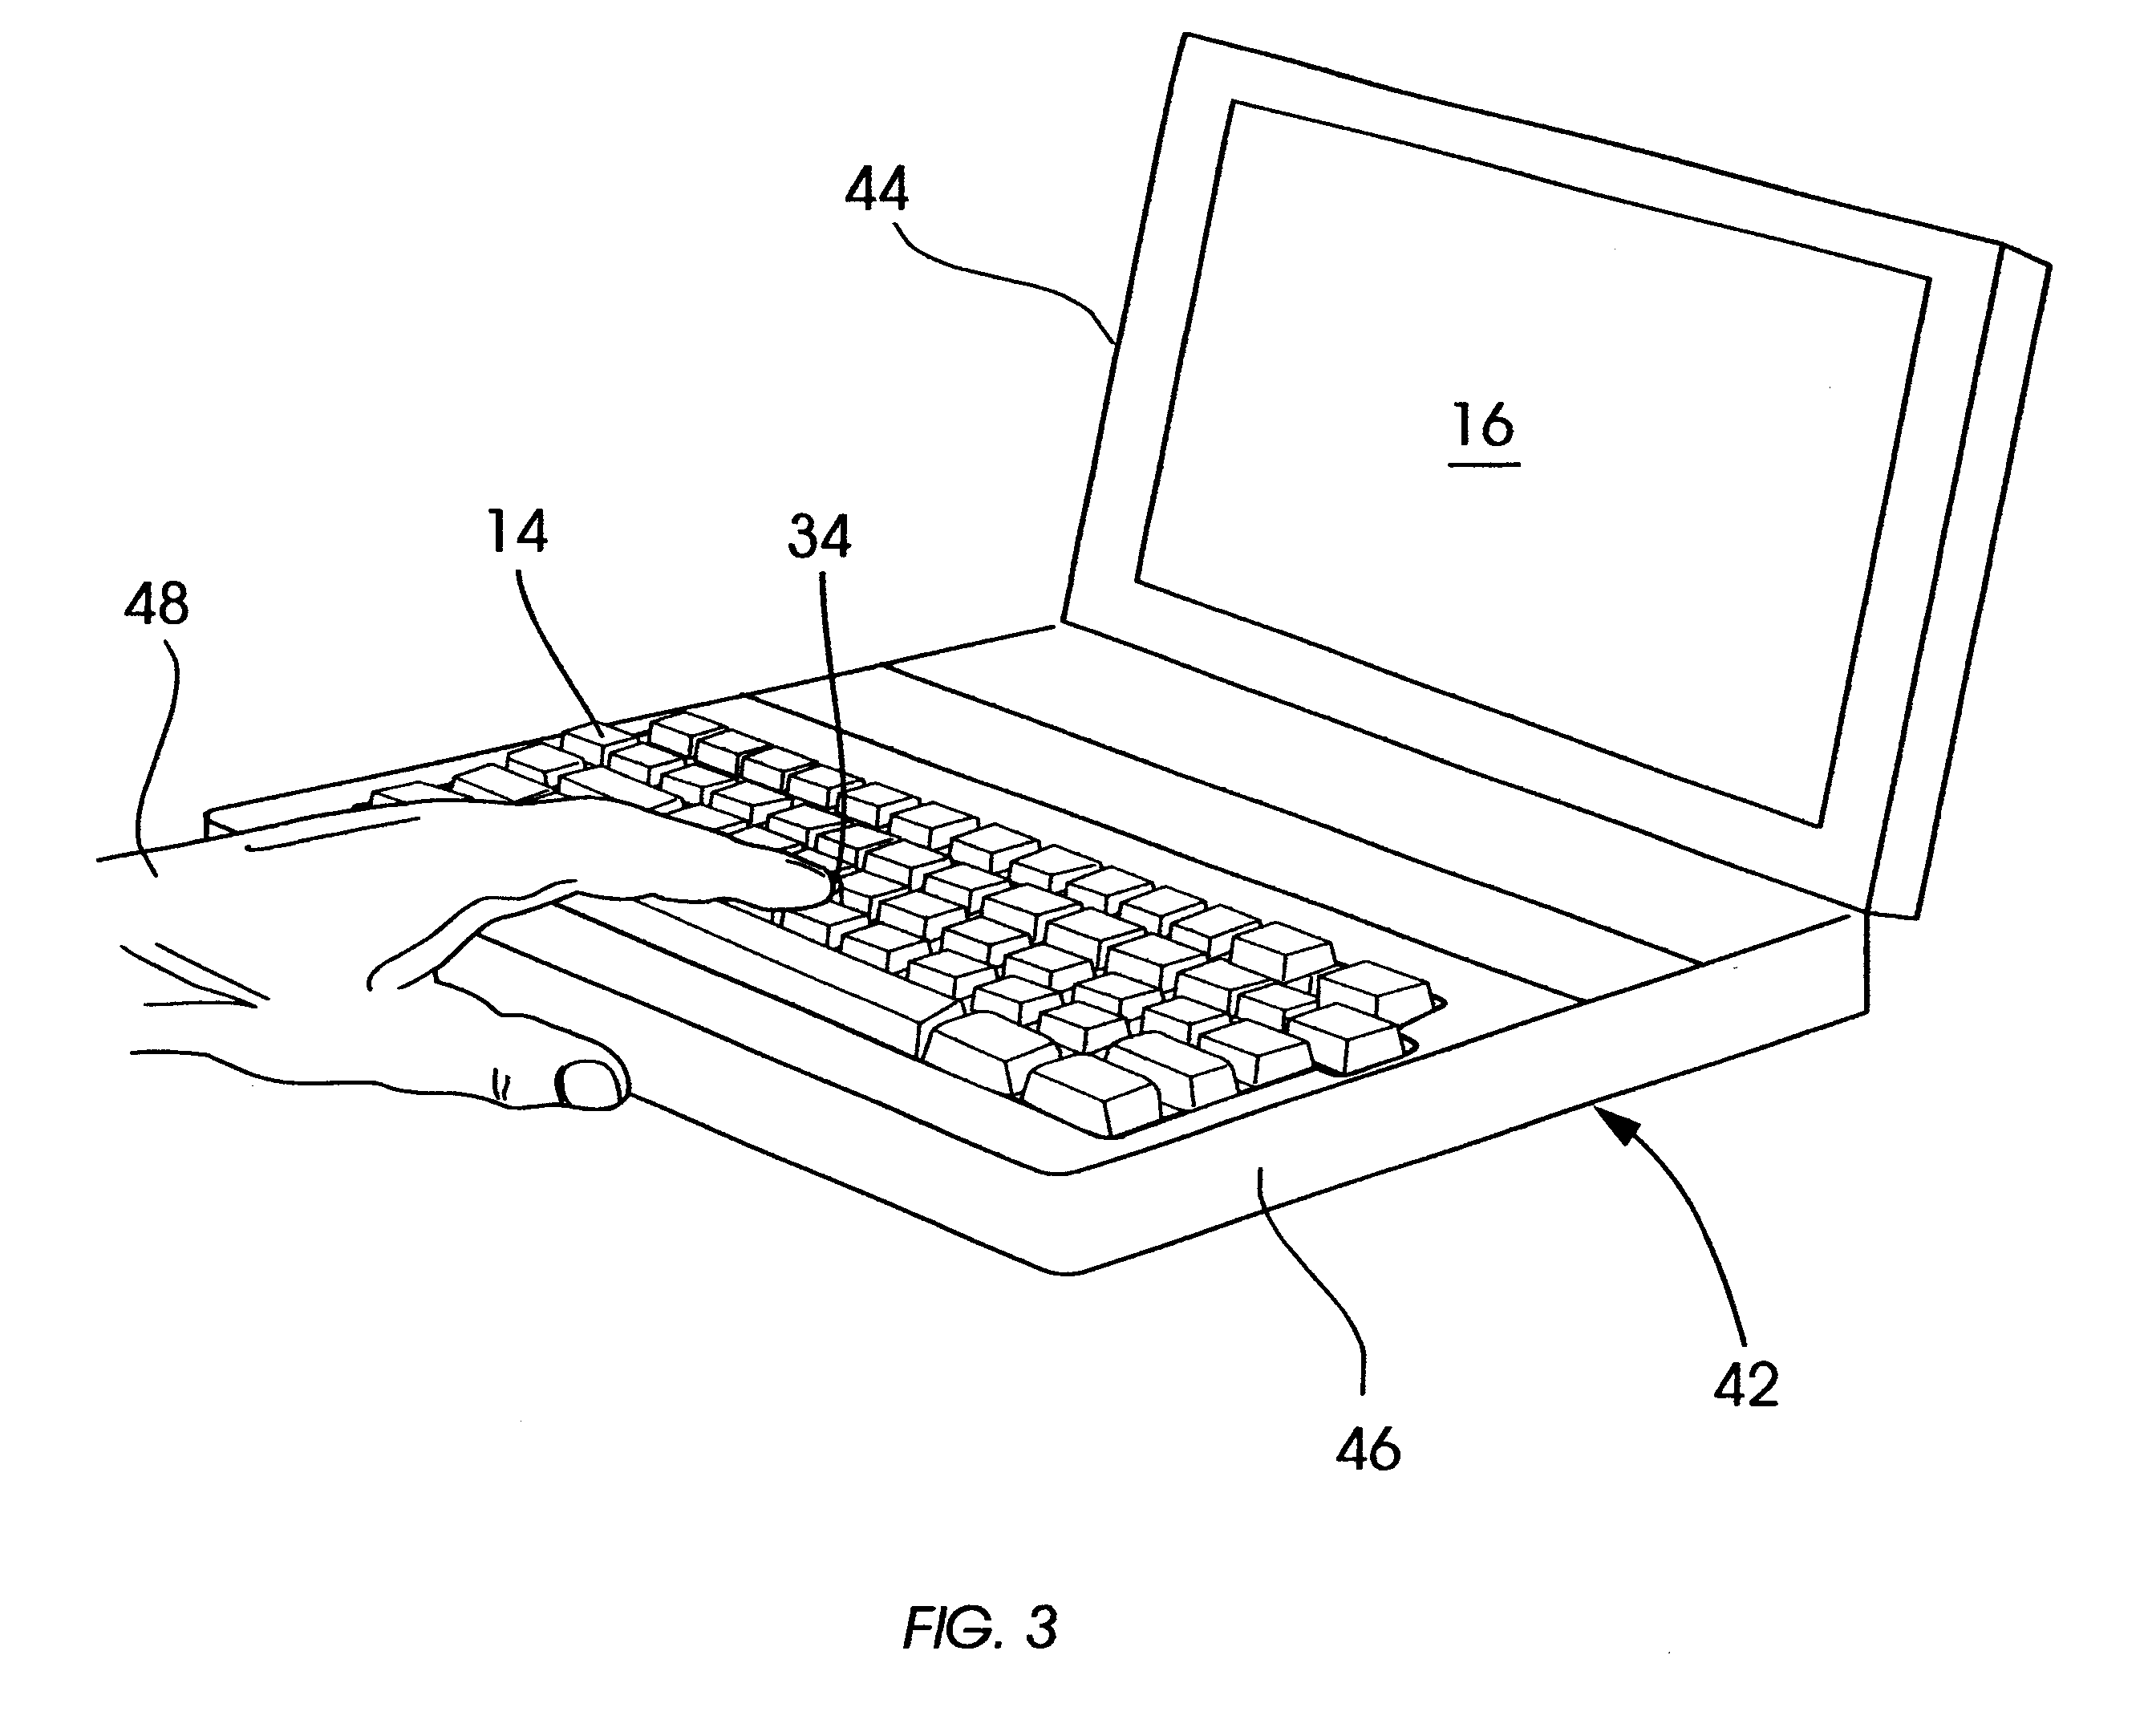 Integrated pointing device having tactile feedback